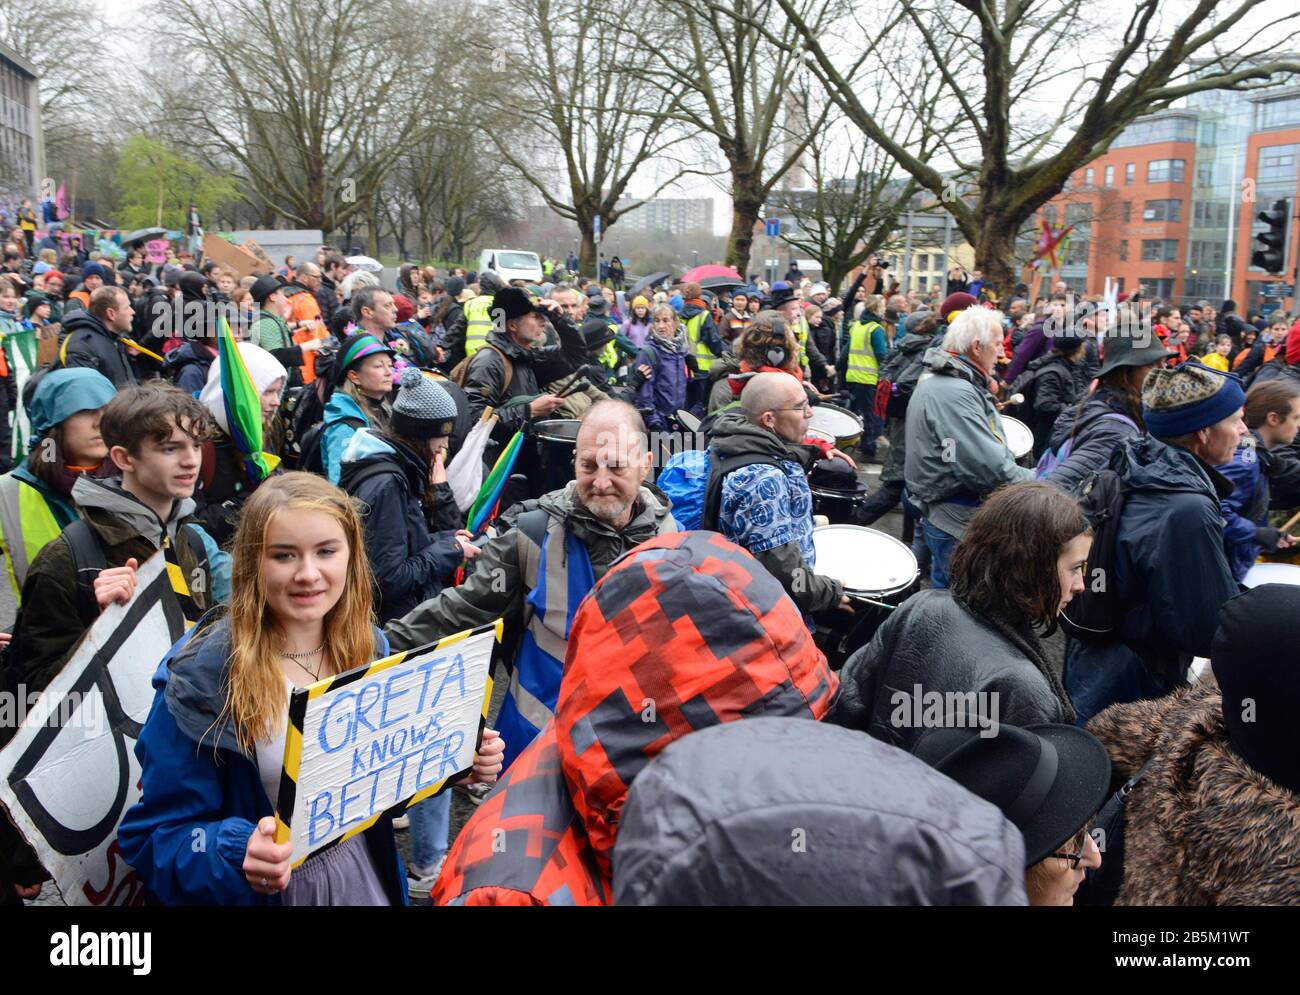 Many supporters march on the Greta Thunberg-led 80th Friday for Future School Strike for the Climate in Bristol, UK, on 28th February 2020 Stock Photo